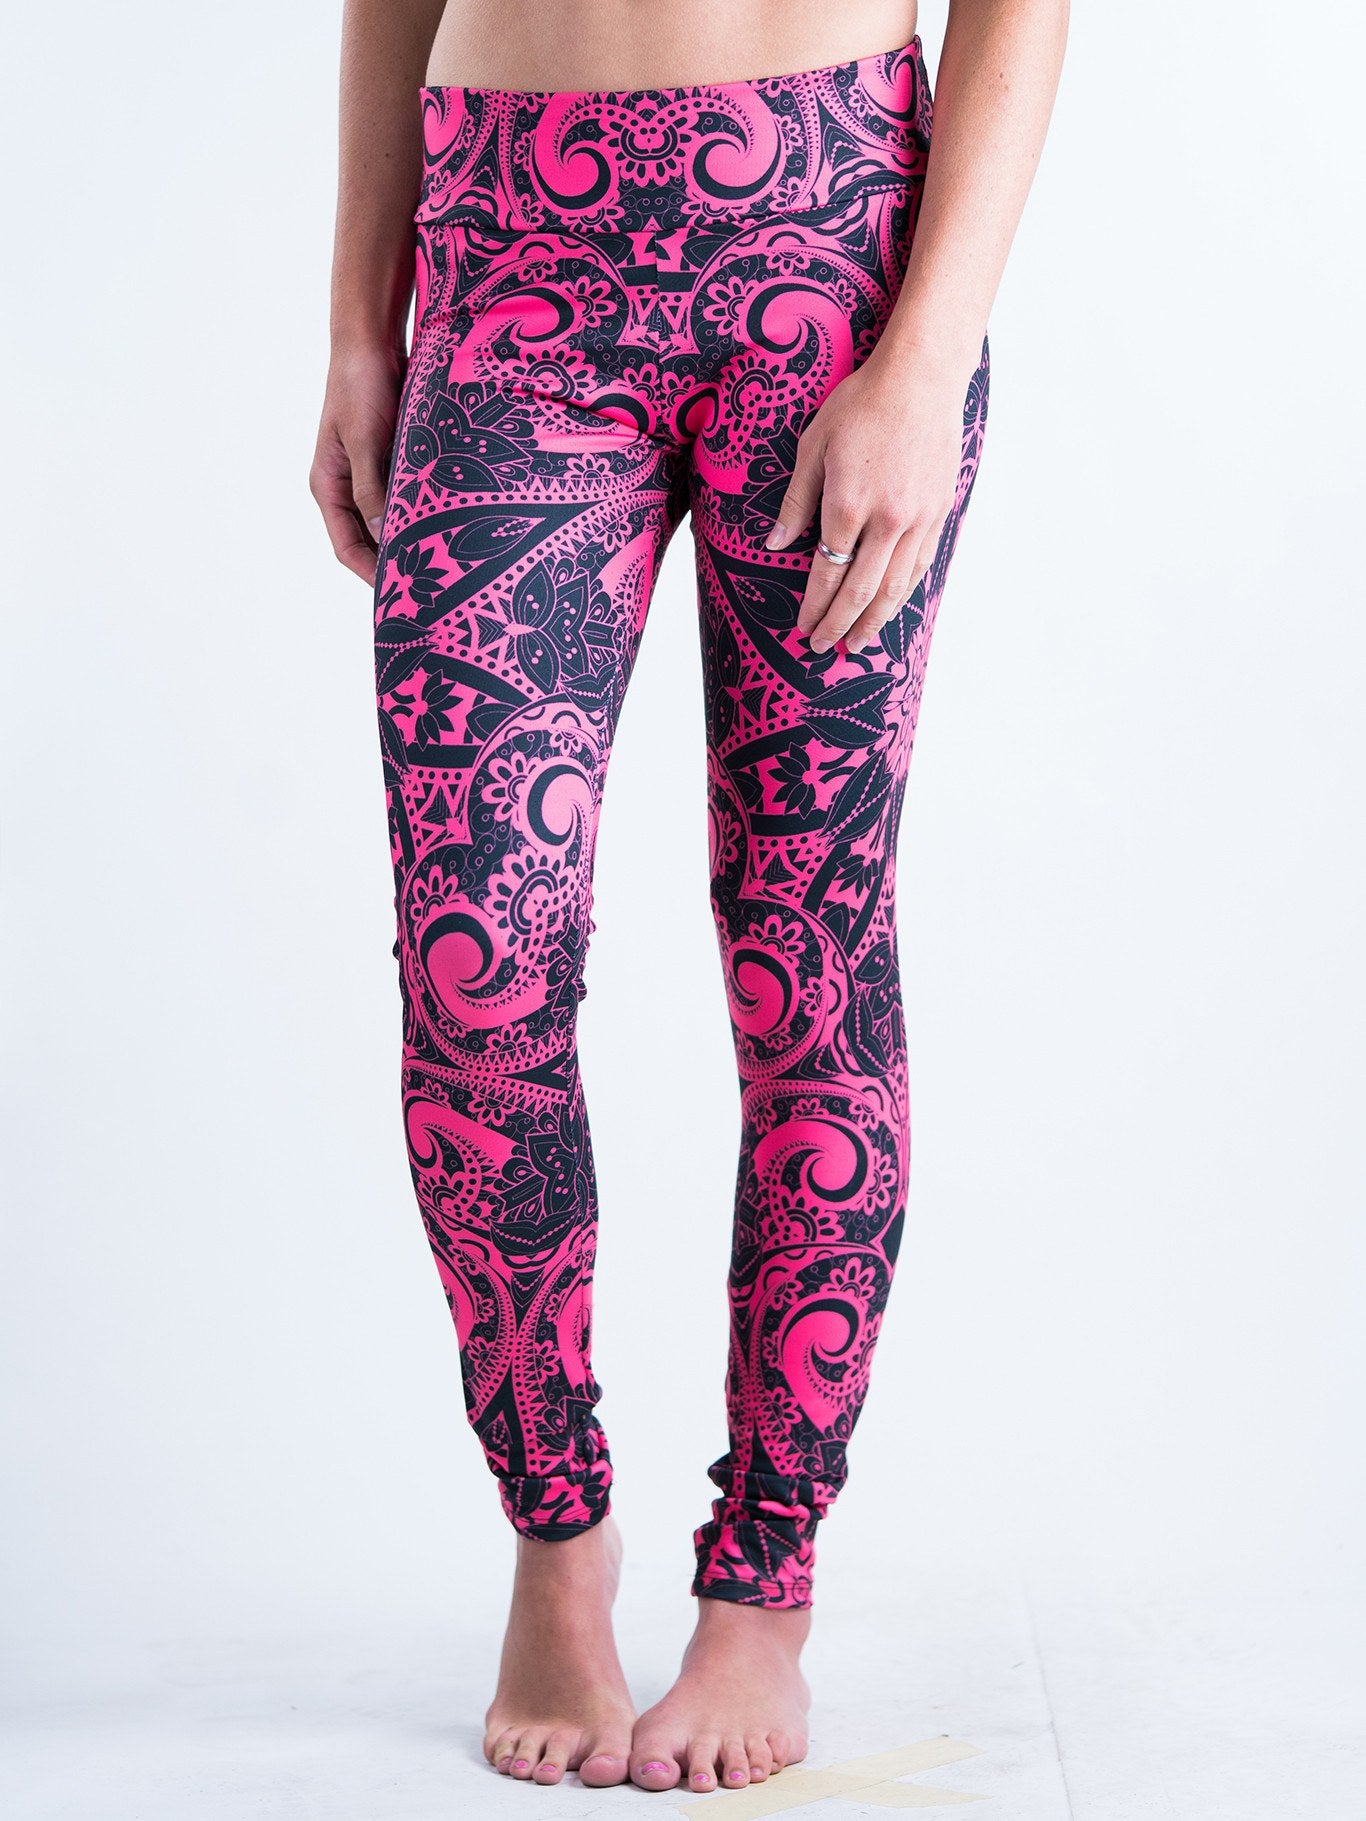 88% Polyester 12% Spandex Leggings Manufacturer Wholesale in China - NDH